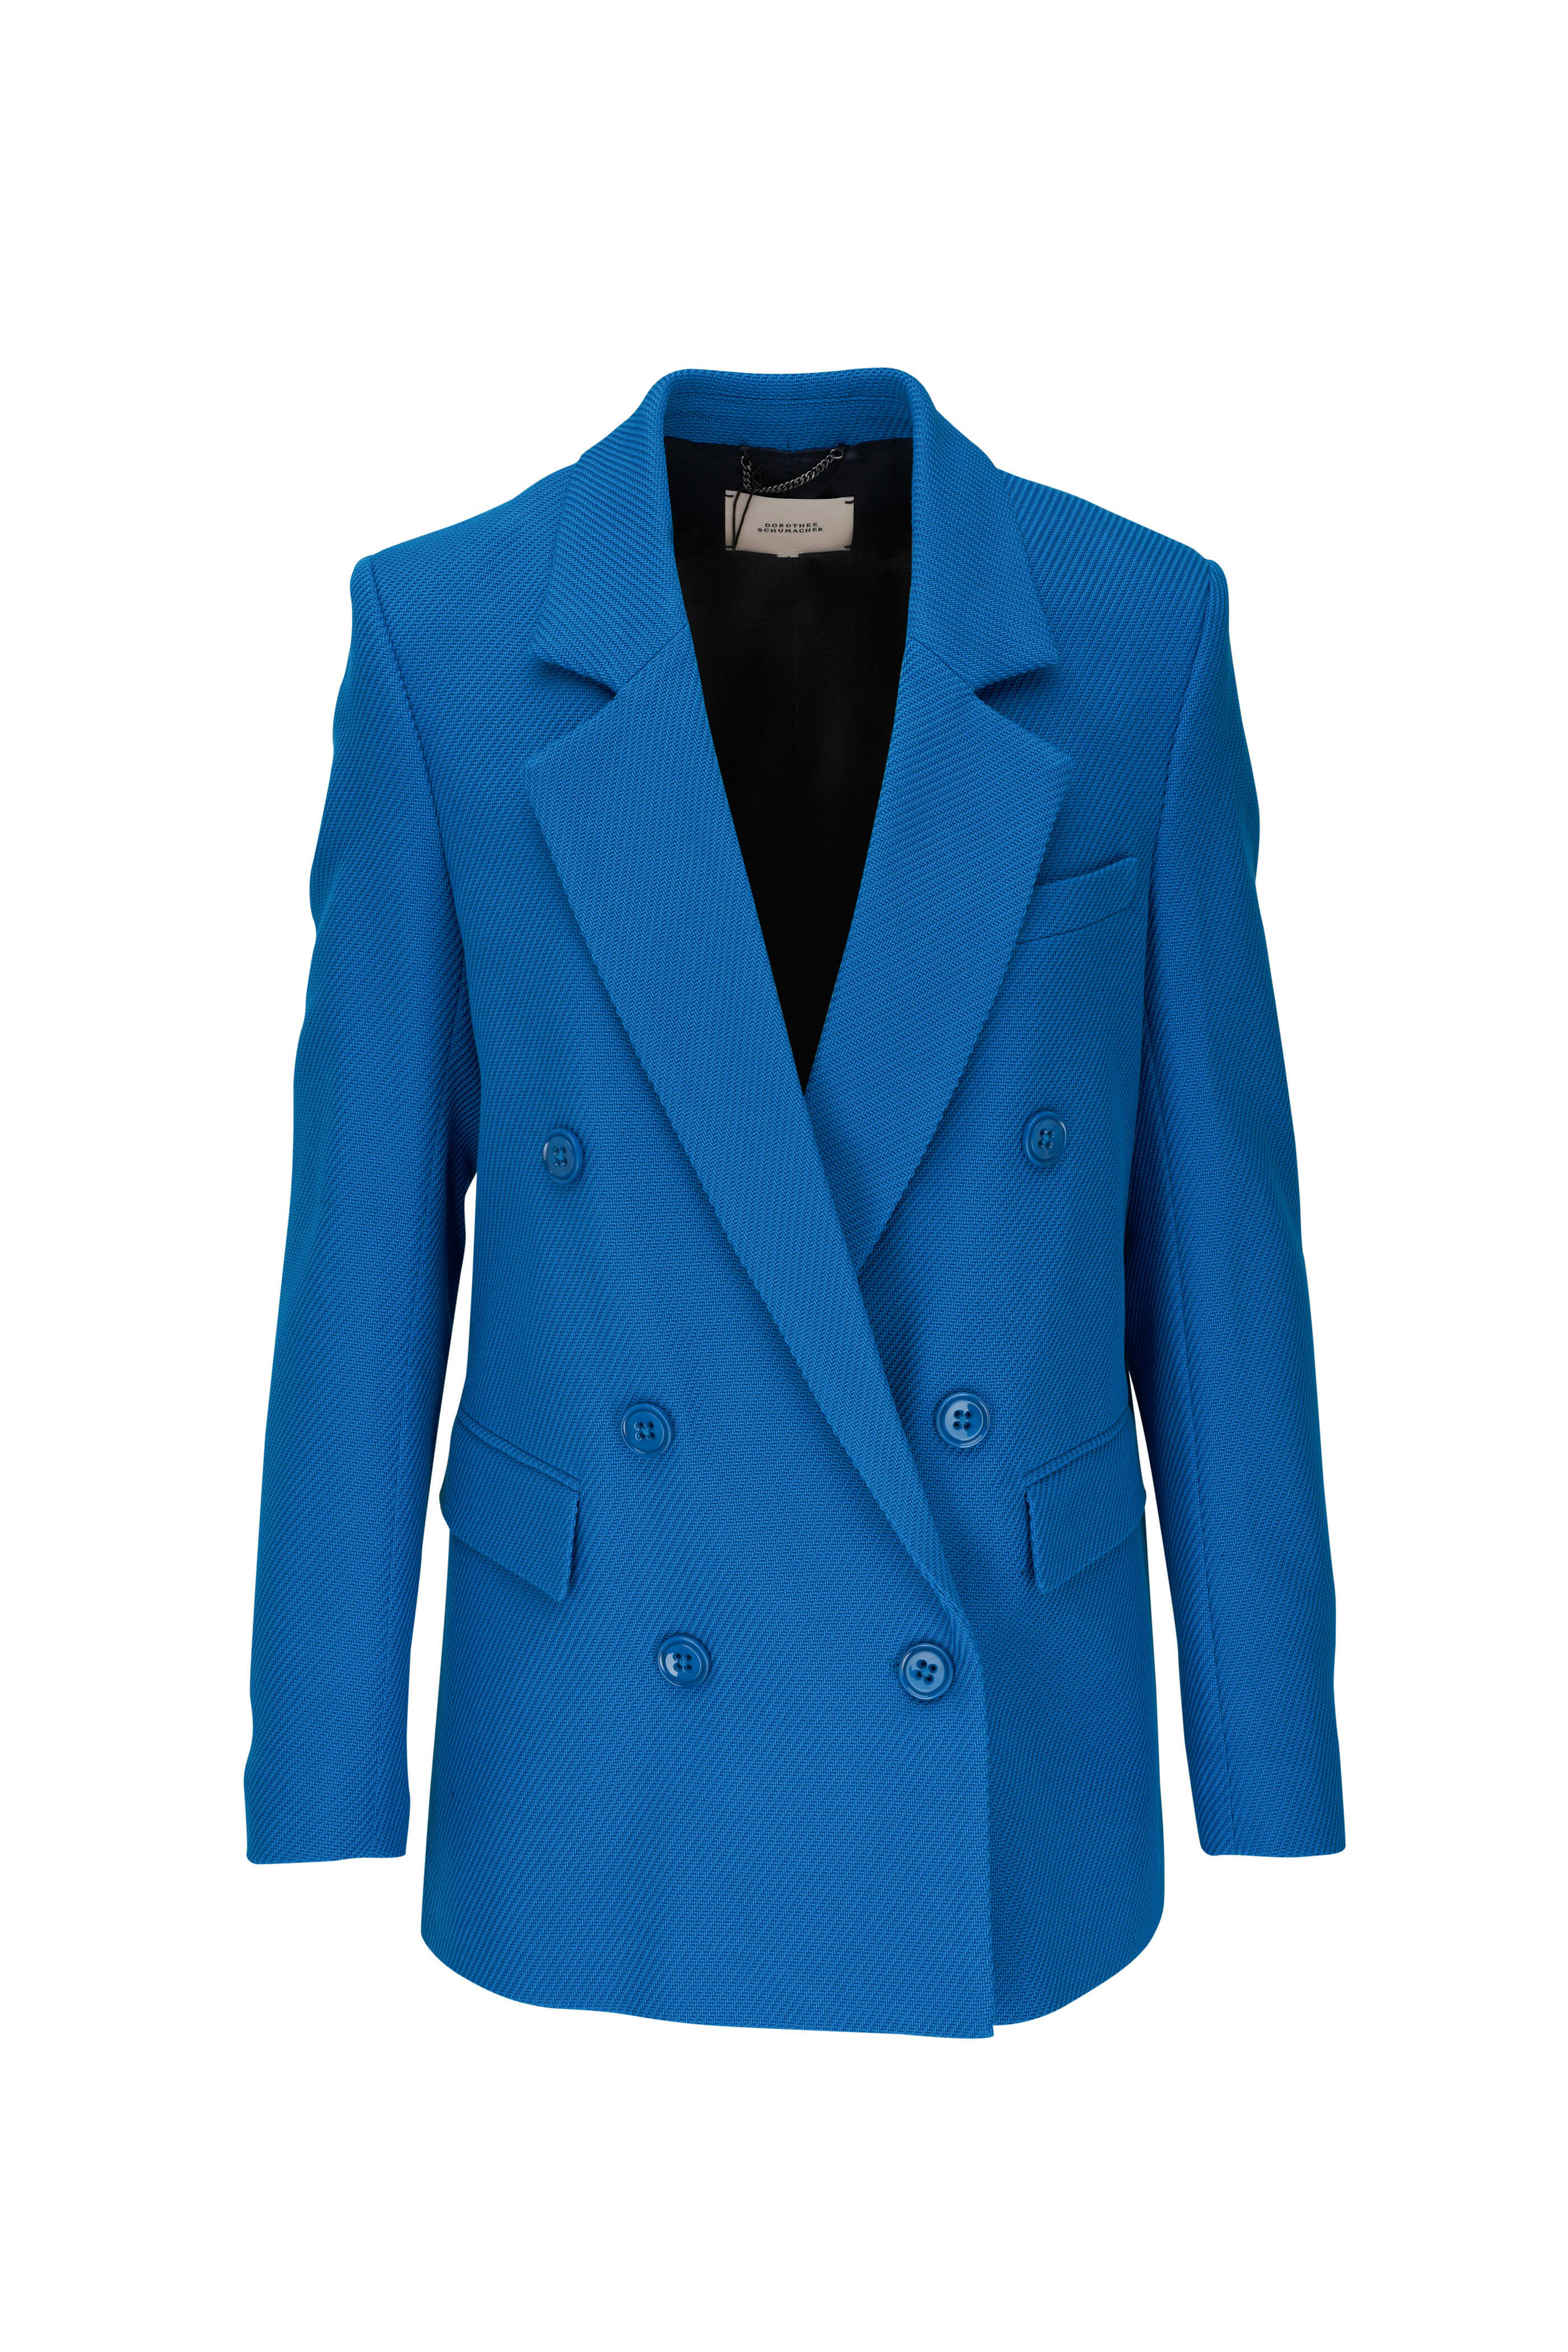 Dorothee Schumacher - Striking Coolness Aqua Blue Double-Breasted Jacket